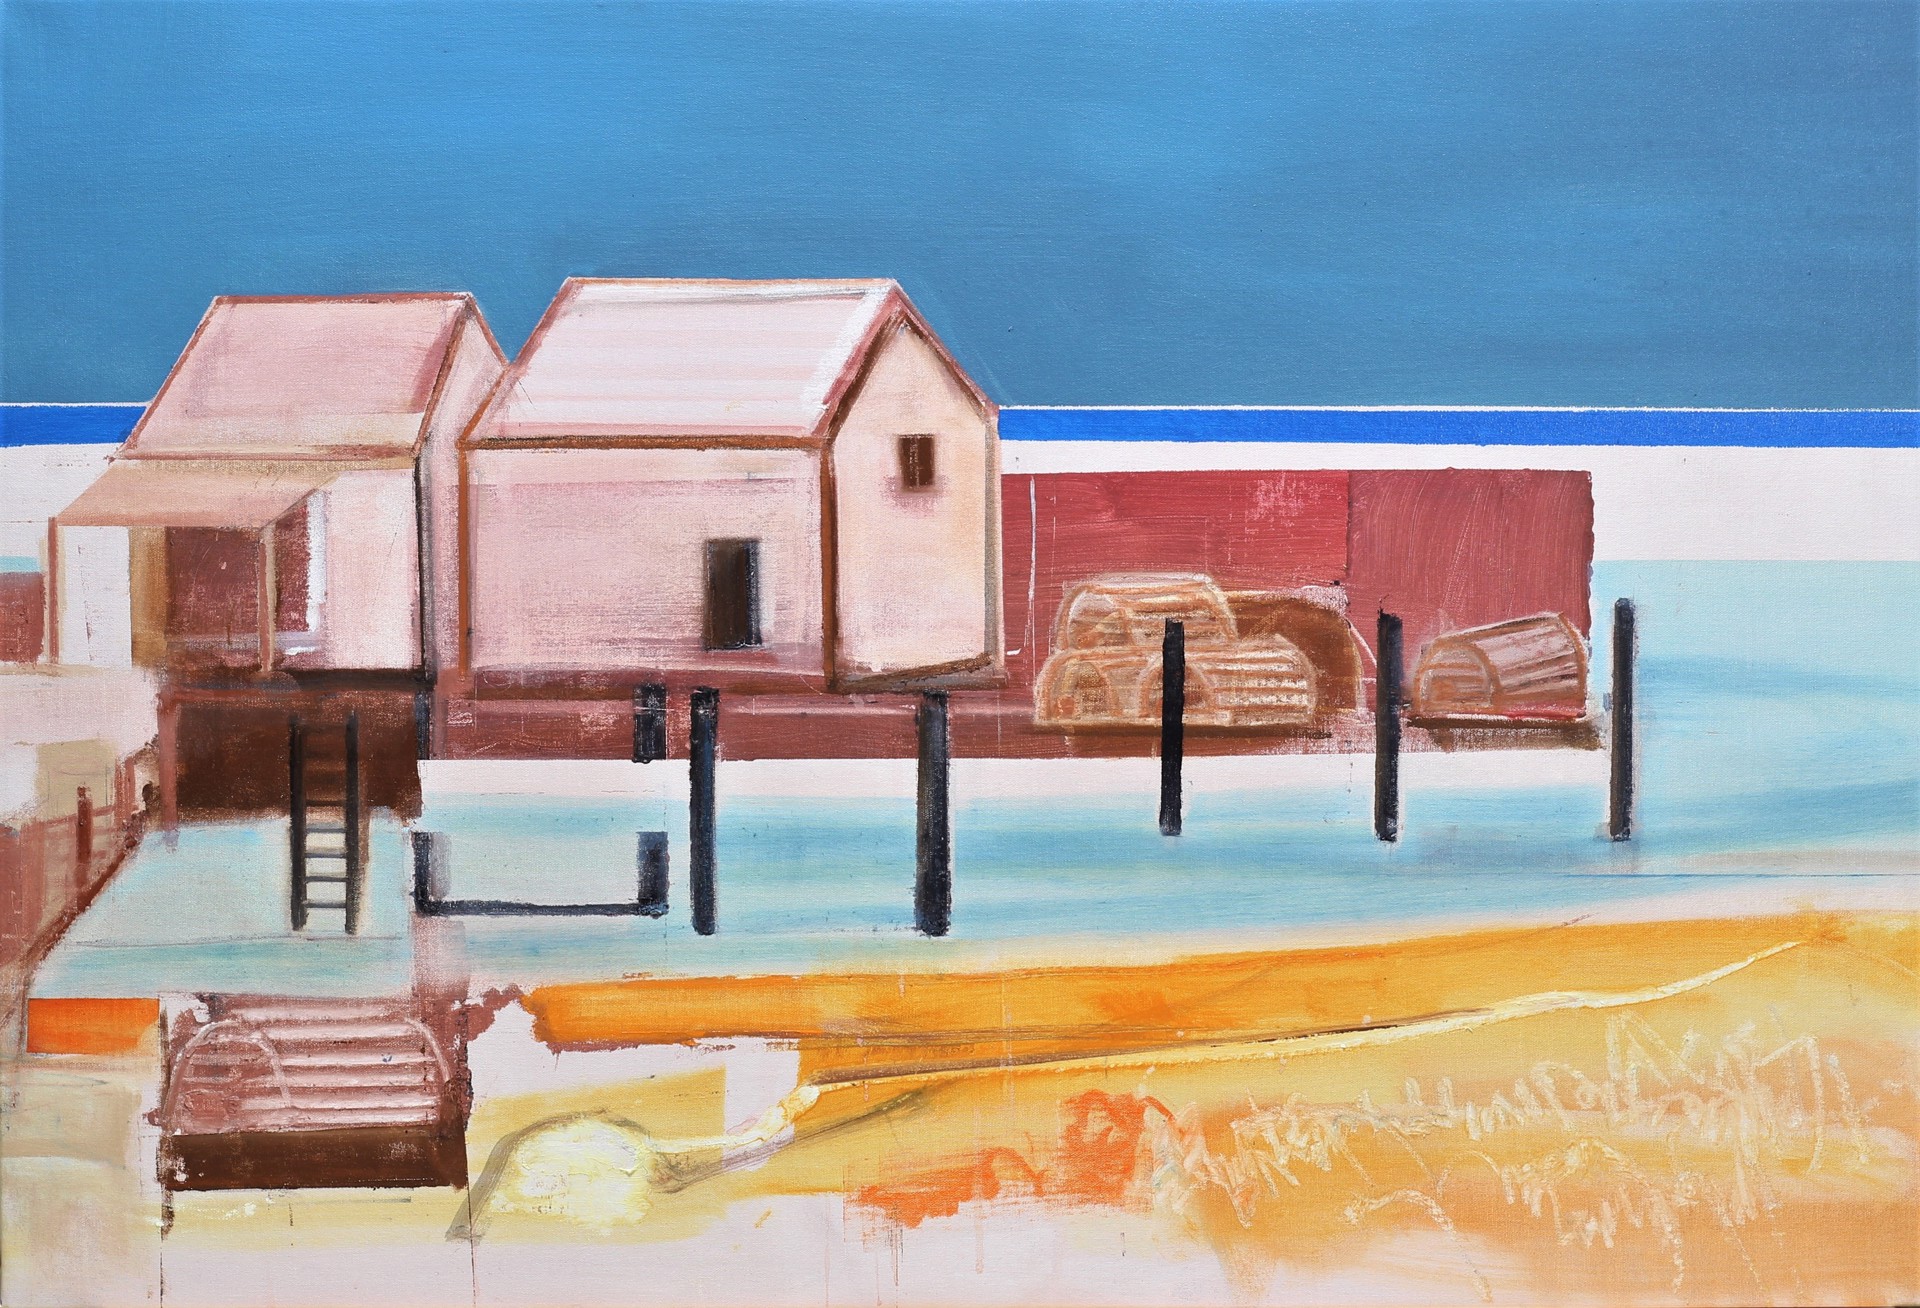 IT WILL BE THE SAME TOMORROW by CHRISTINA THWAITES (Landscape)